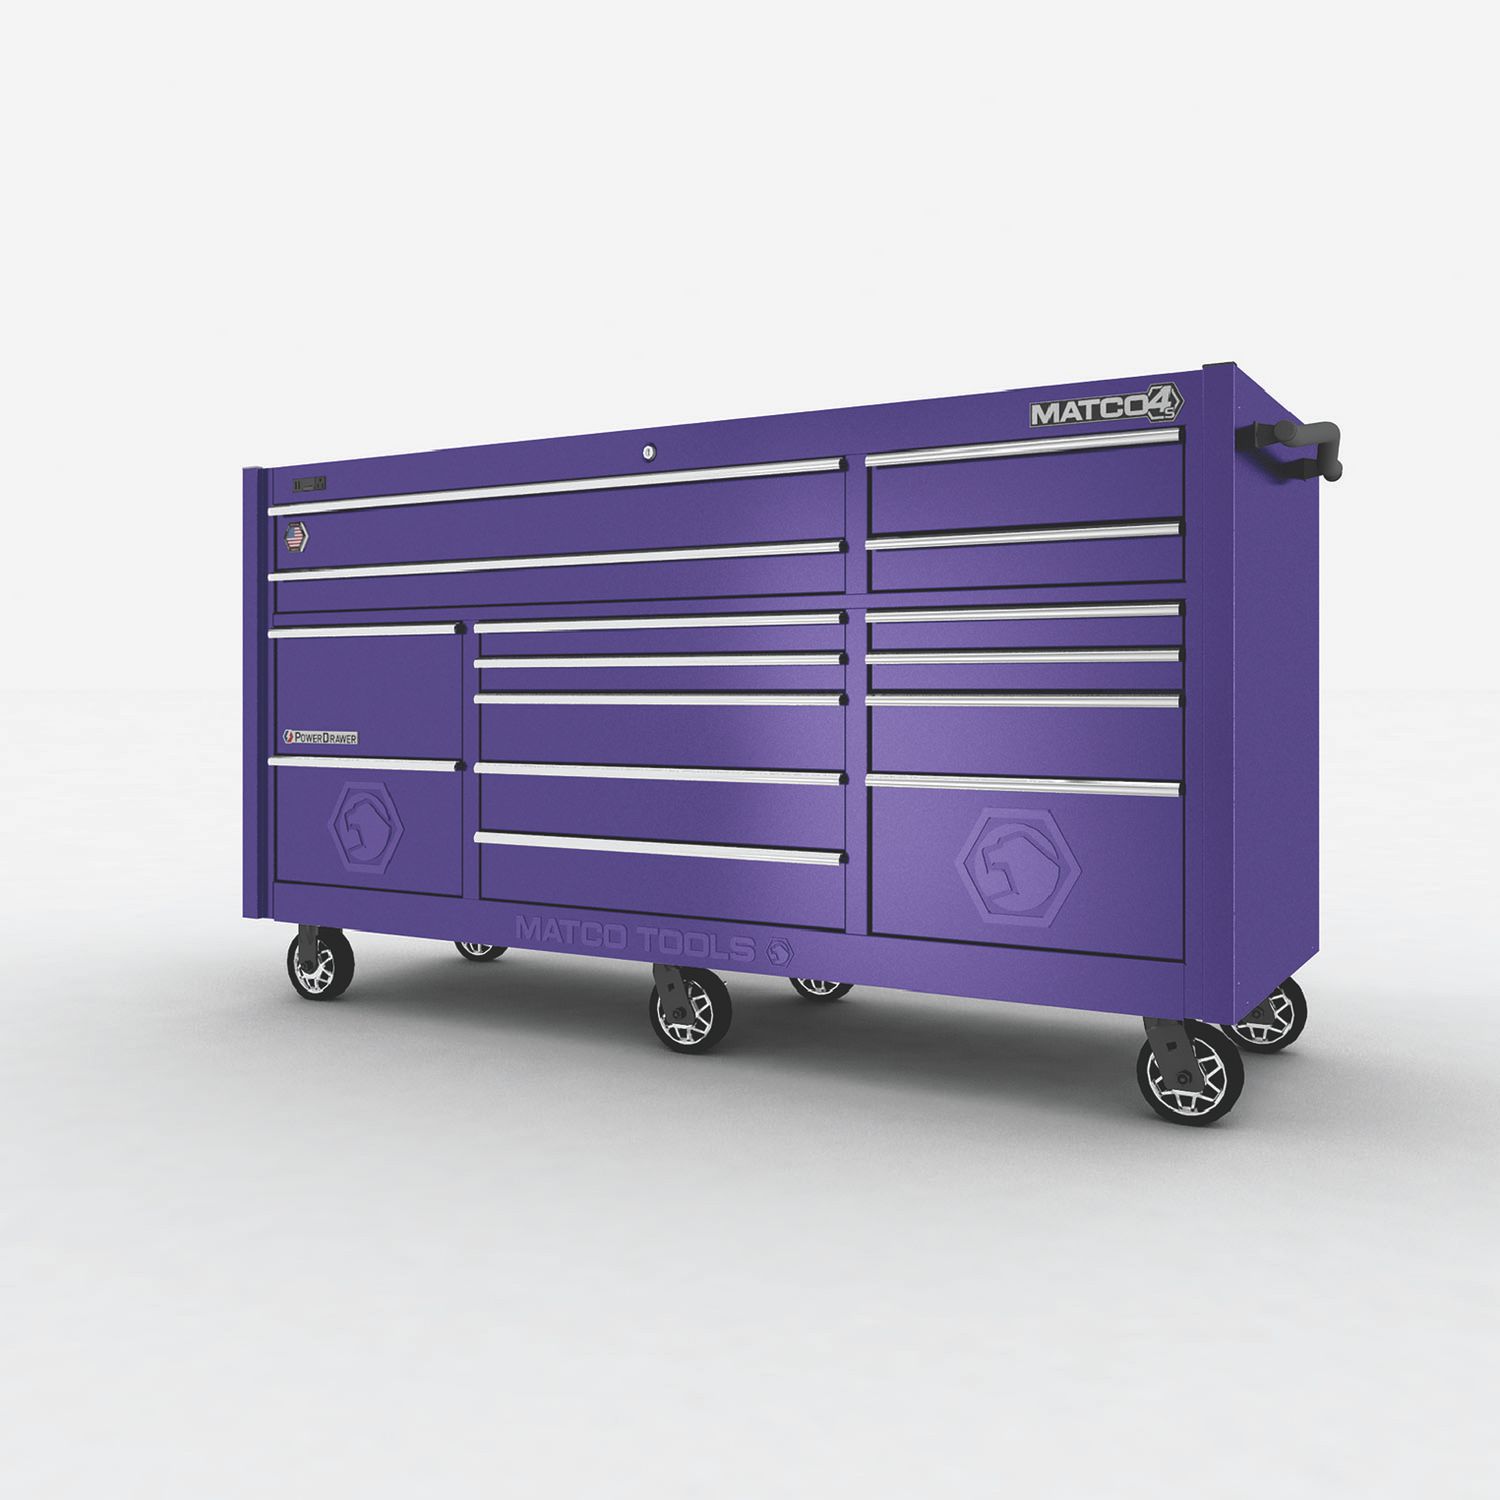 Matco Tools - Ready for more Purple?? Check out this sleek purple trim on  the 6s boxes on this #toolstoragetuesday